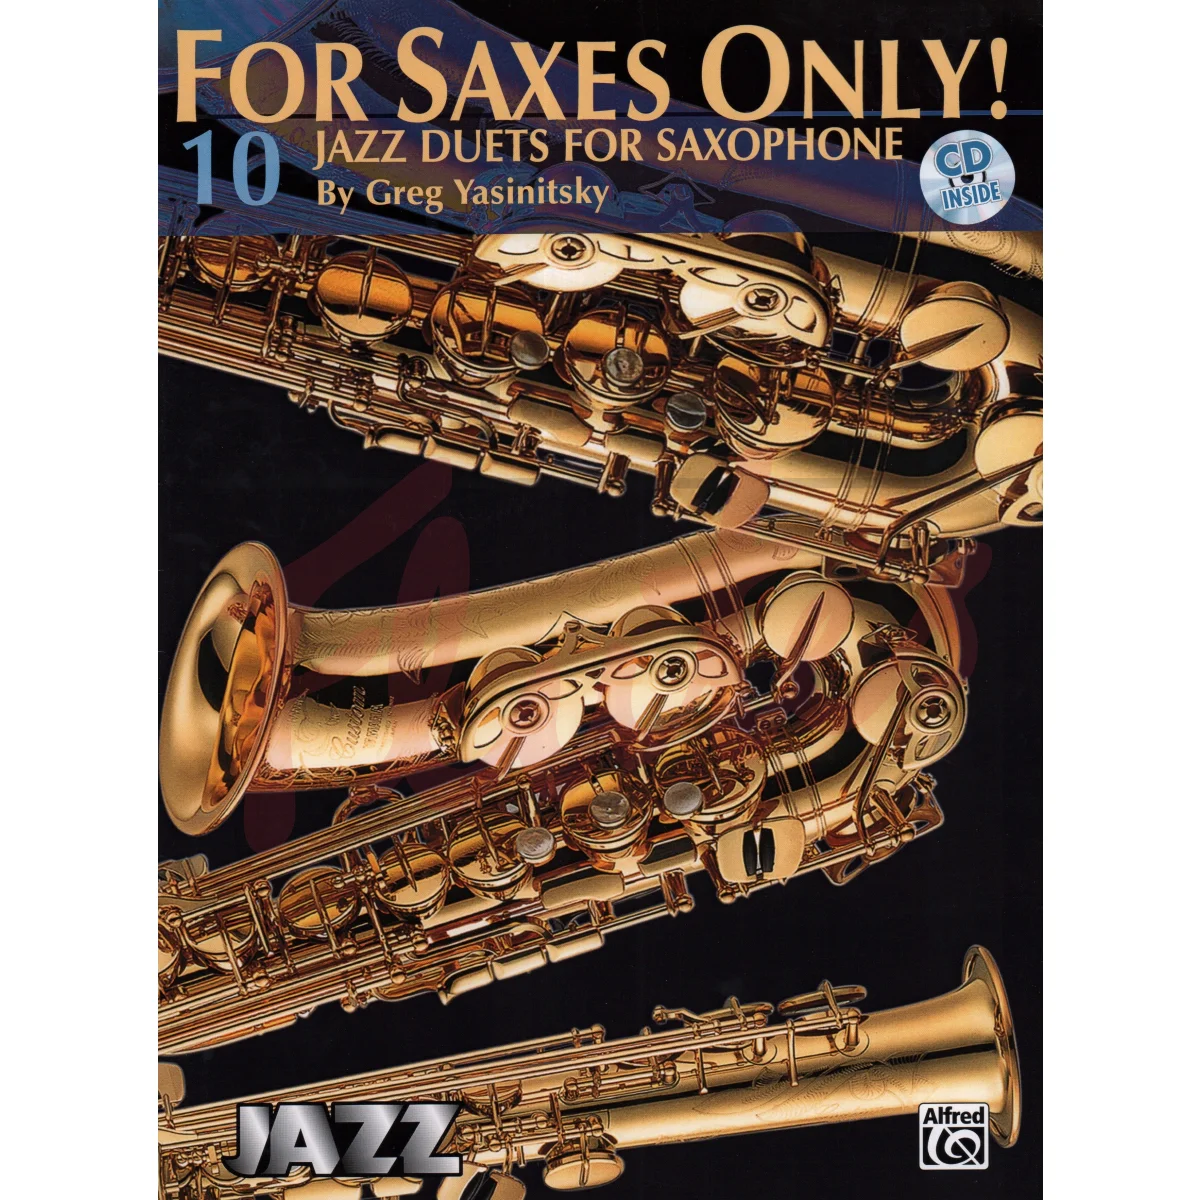 For Saxes Only! 10 Jazz Duets for Saxophone